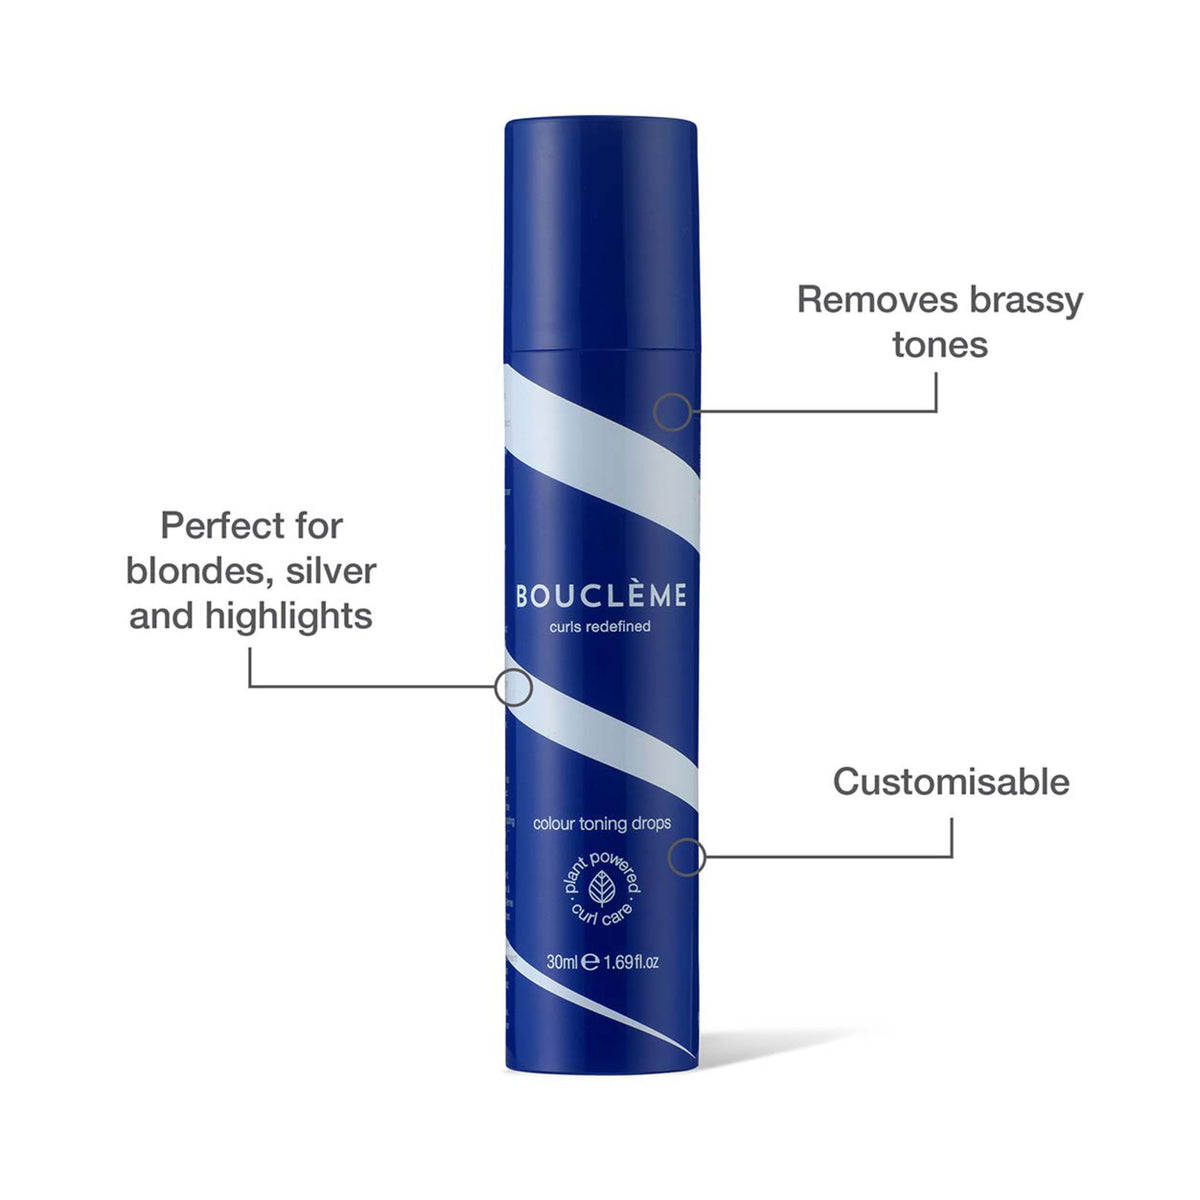 Bouclème Colour Toning Drops . This product is for blonde hair